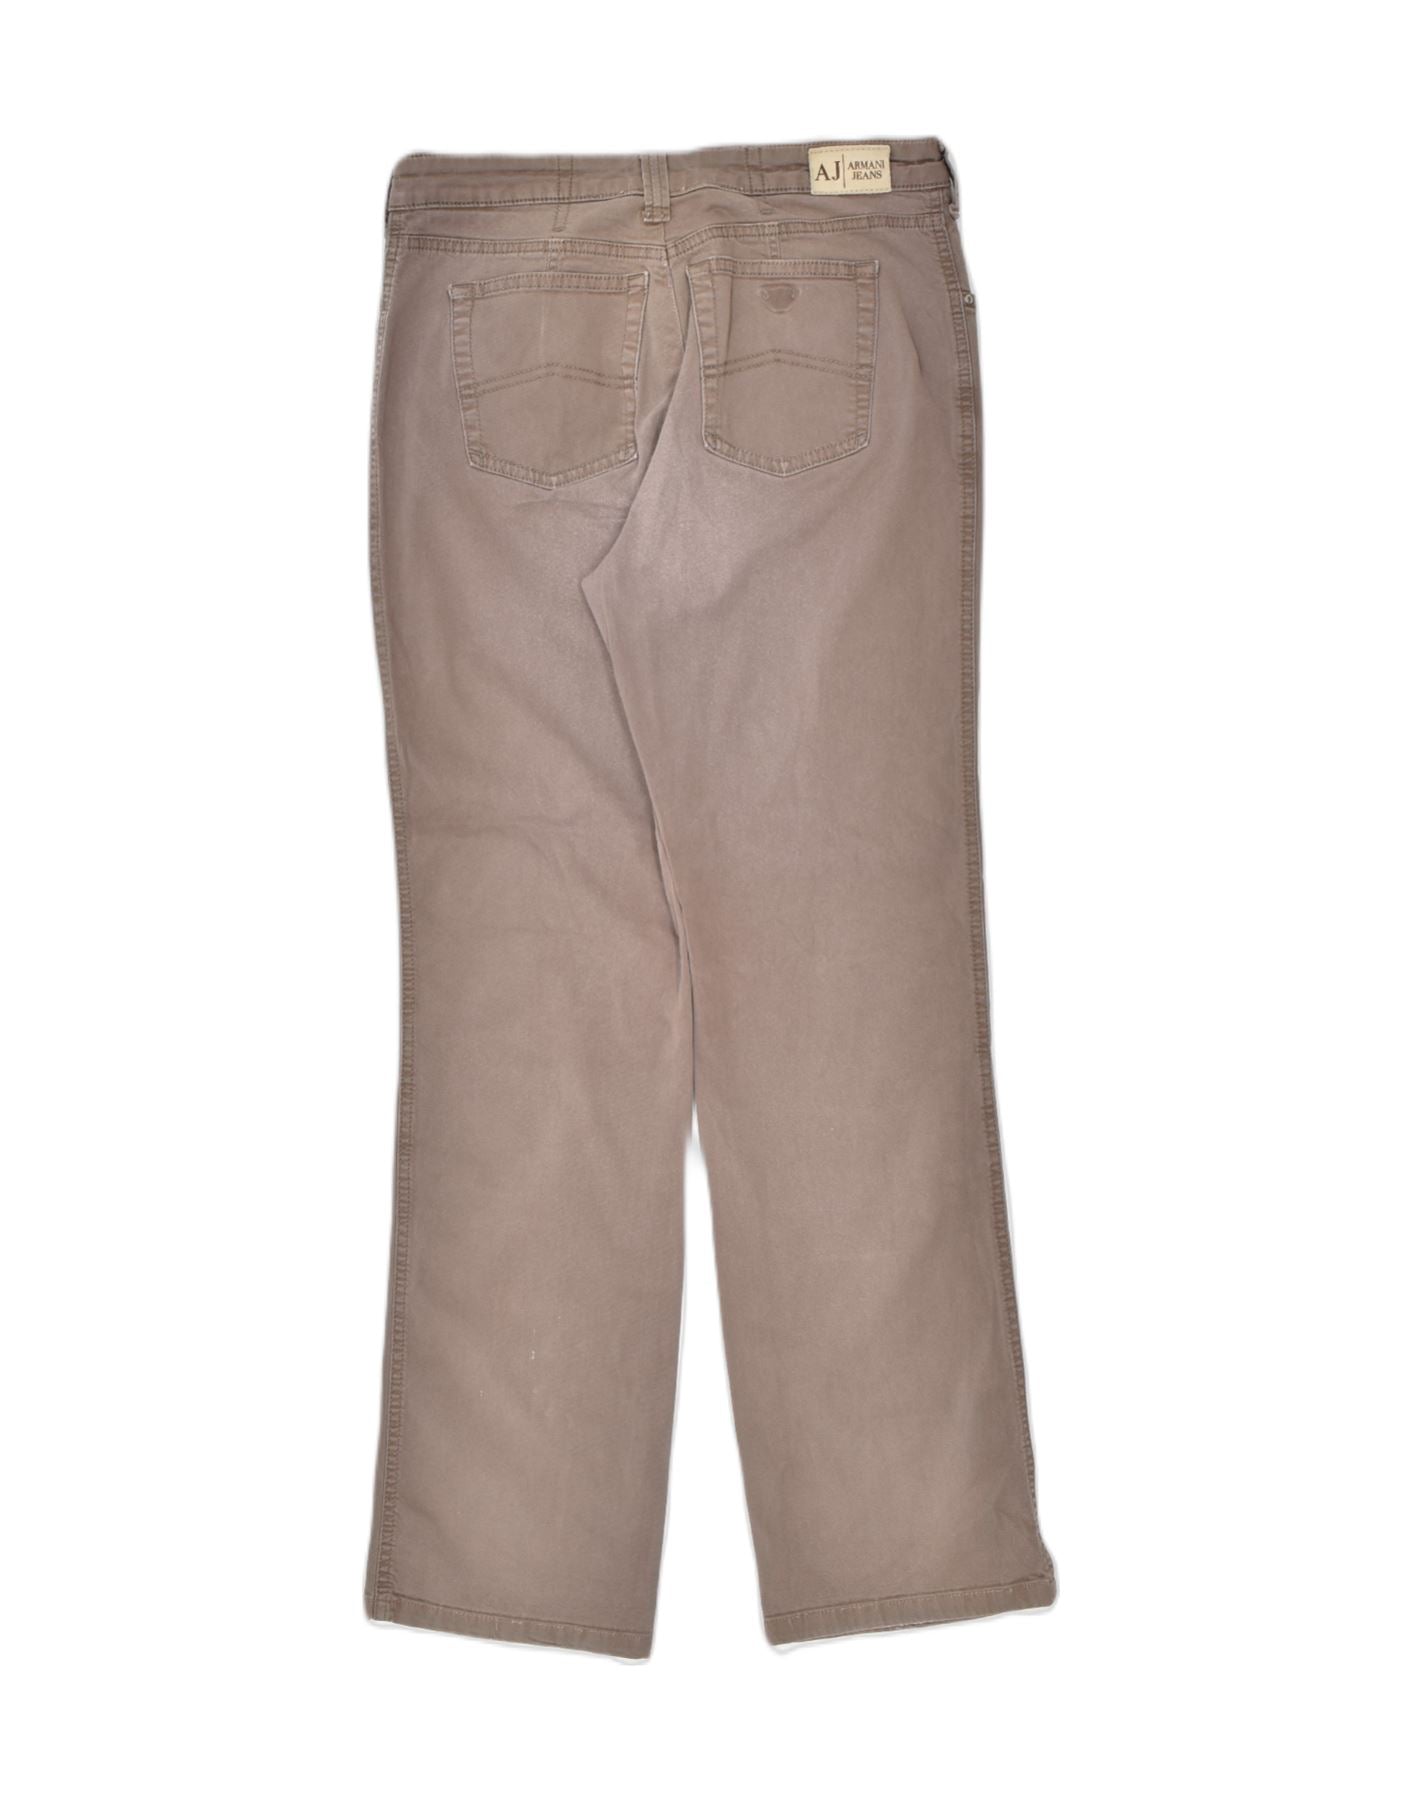 NWT ARMANI JEANS PANTS solid light grey cotton trousers luxury Italy us 30  | eBay